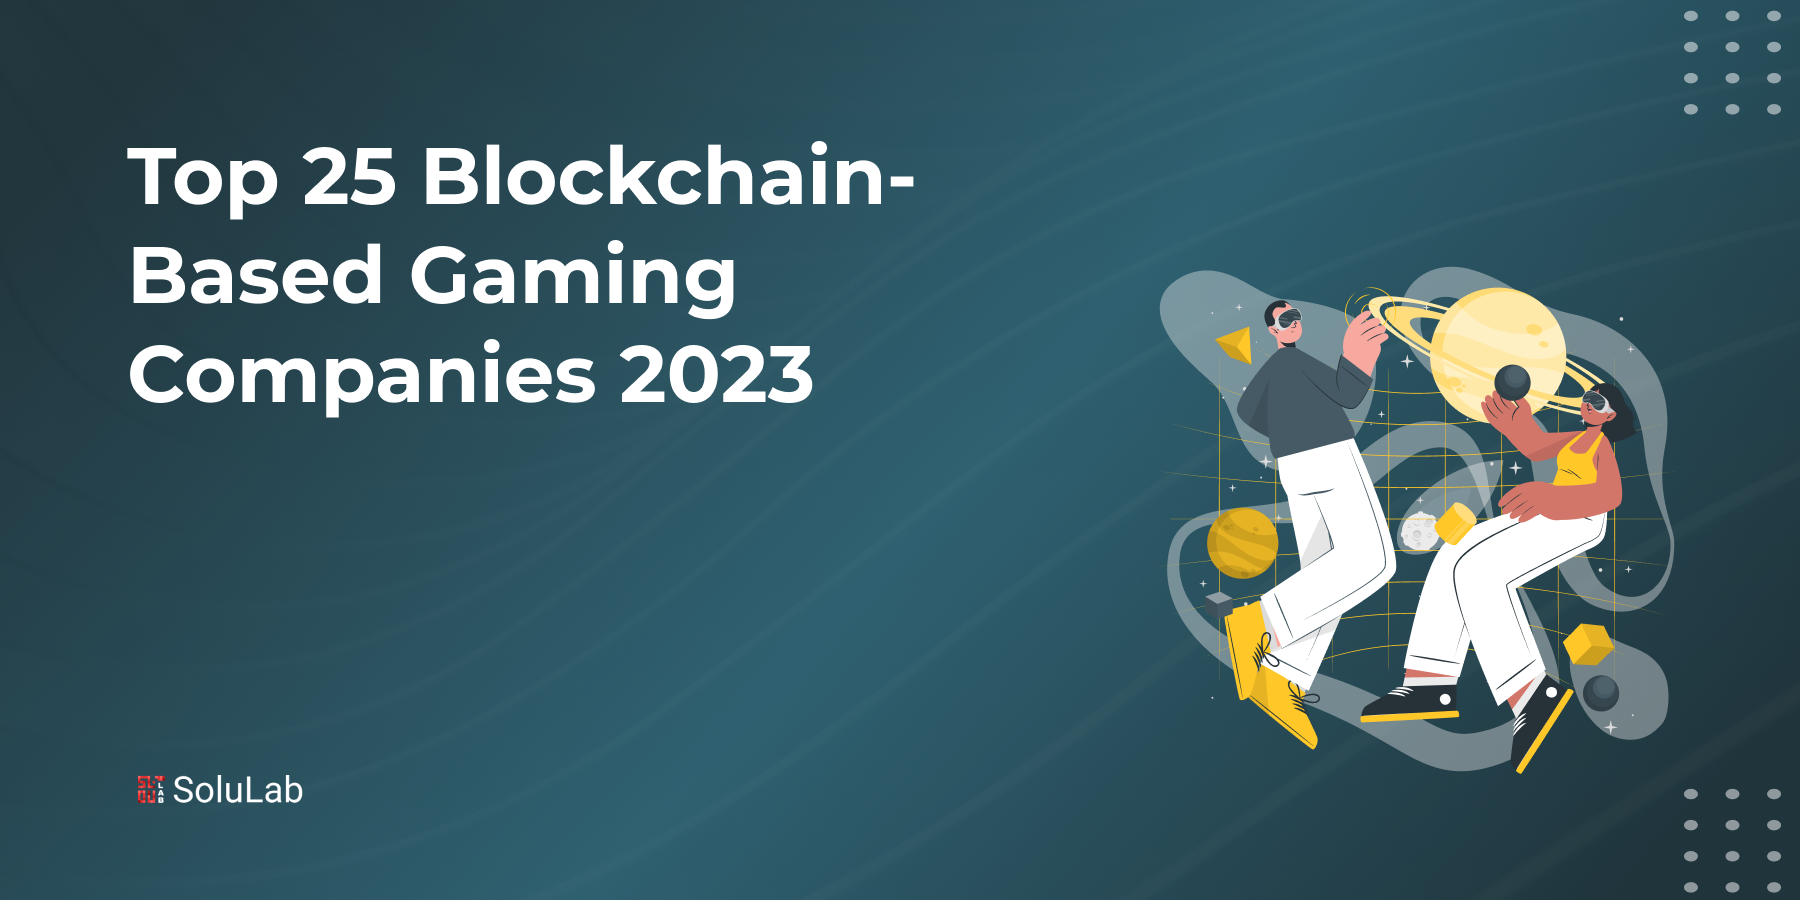 eGame Bringing Blockchain To eSports With Revolutionary Gaming Platform -  The European Business Review